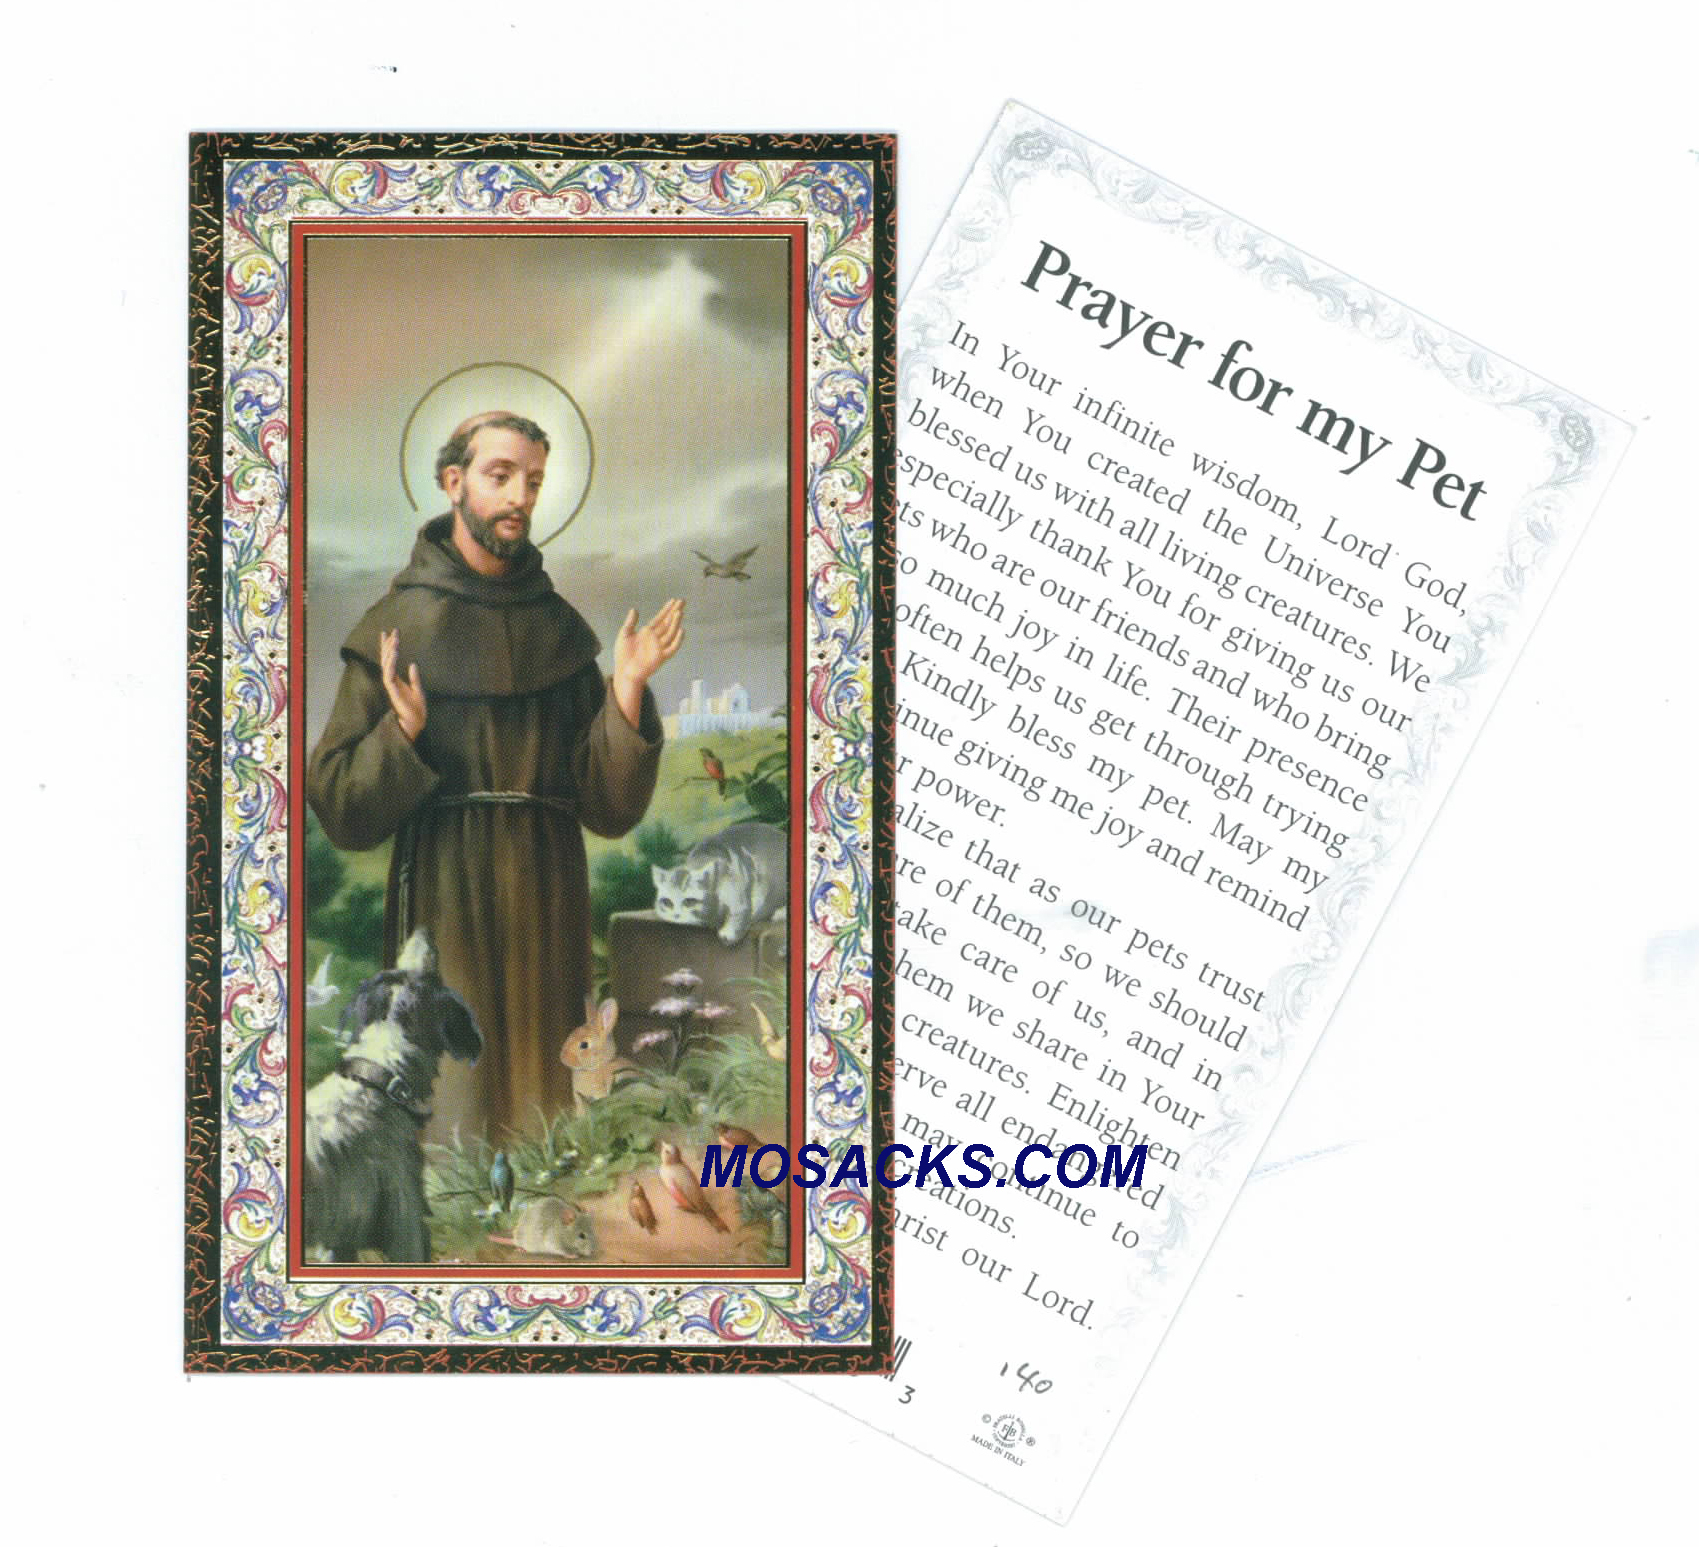 St. Francis "Prayer For My Pet" Holy Card 734-314